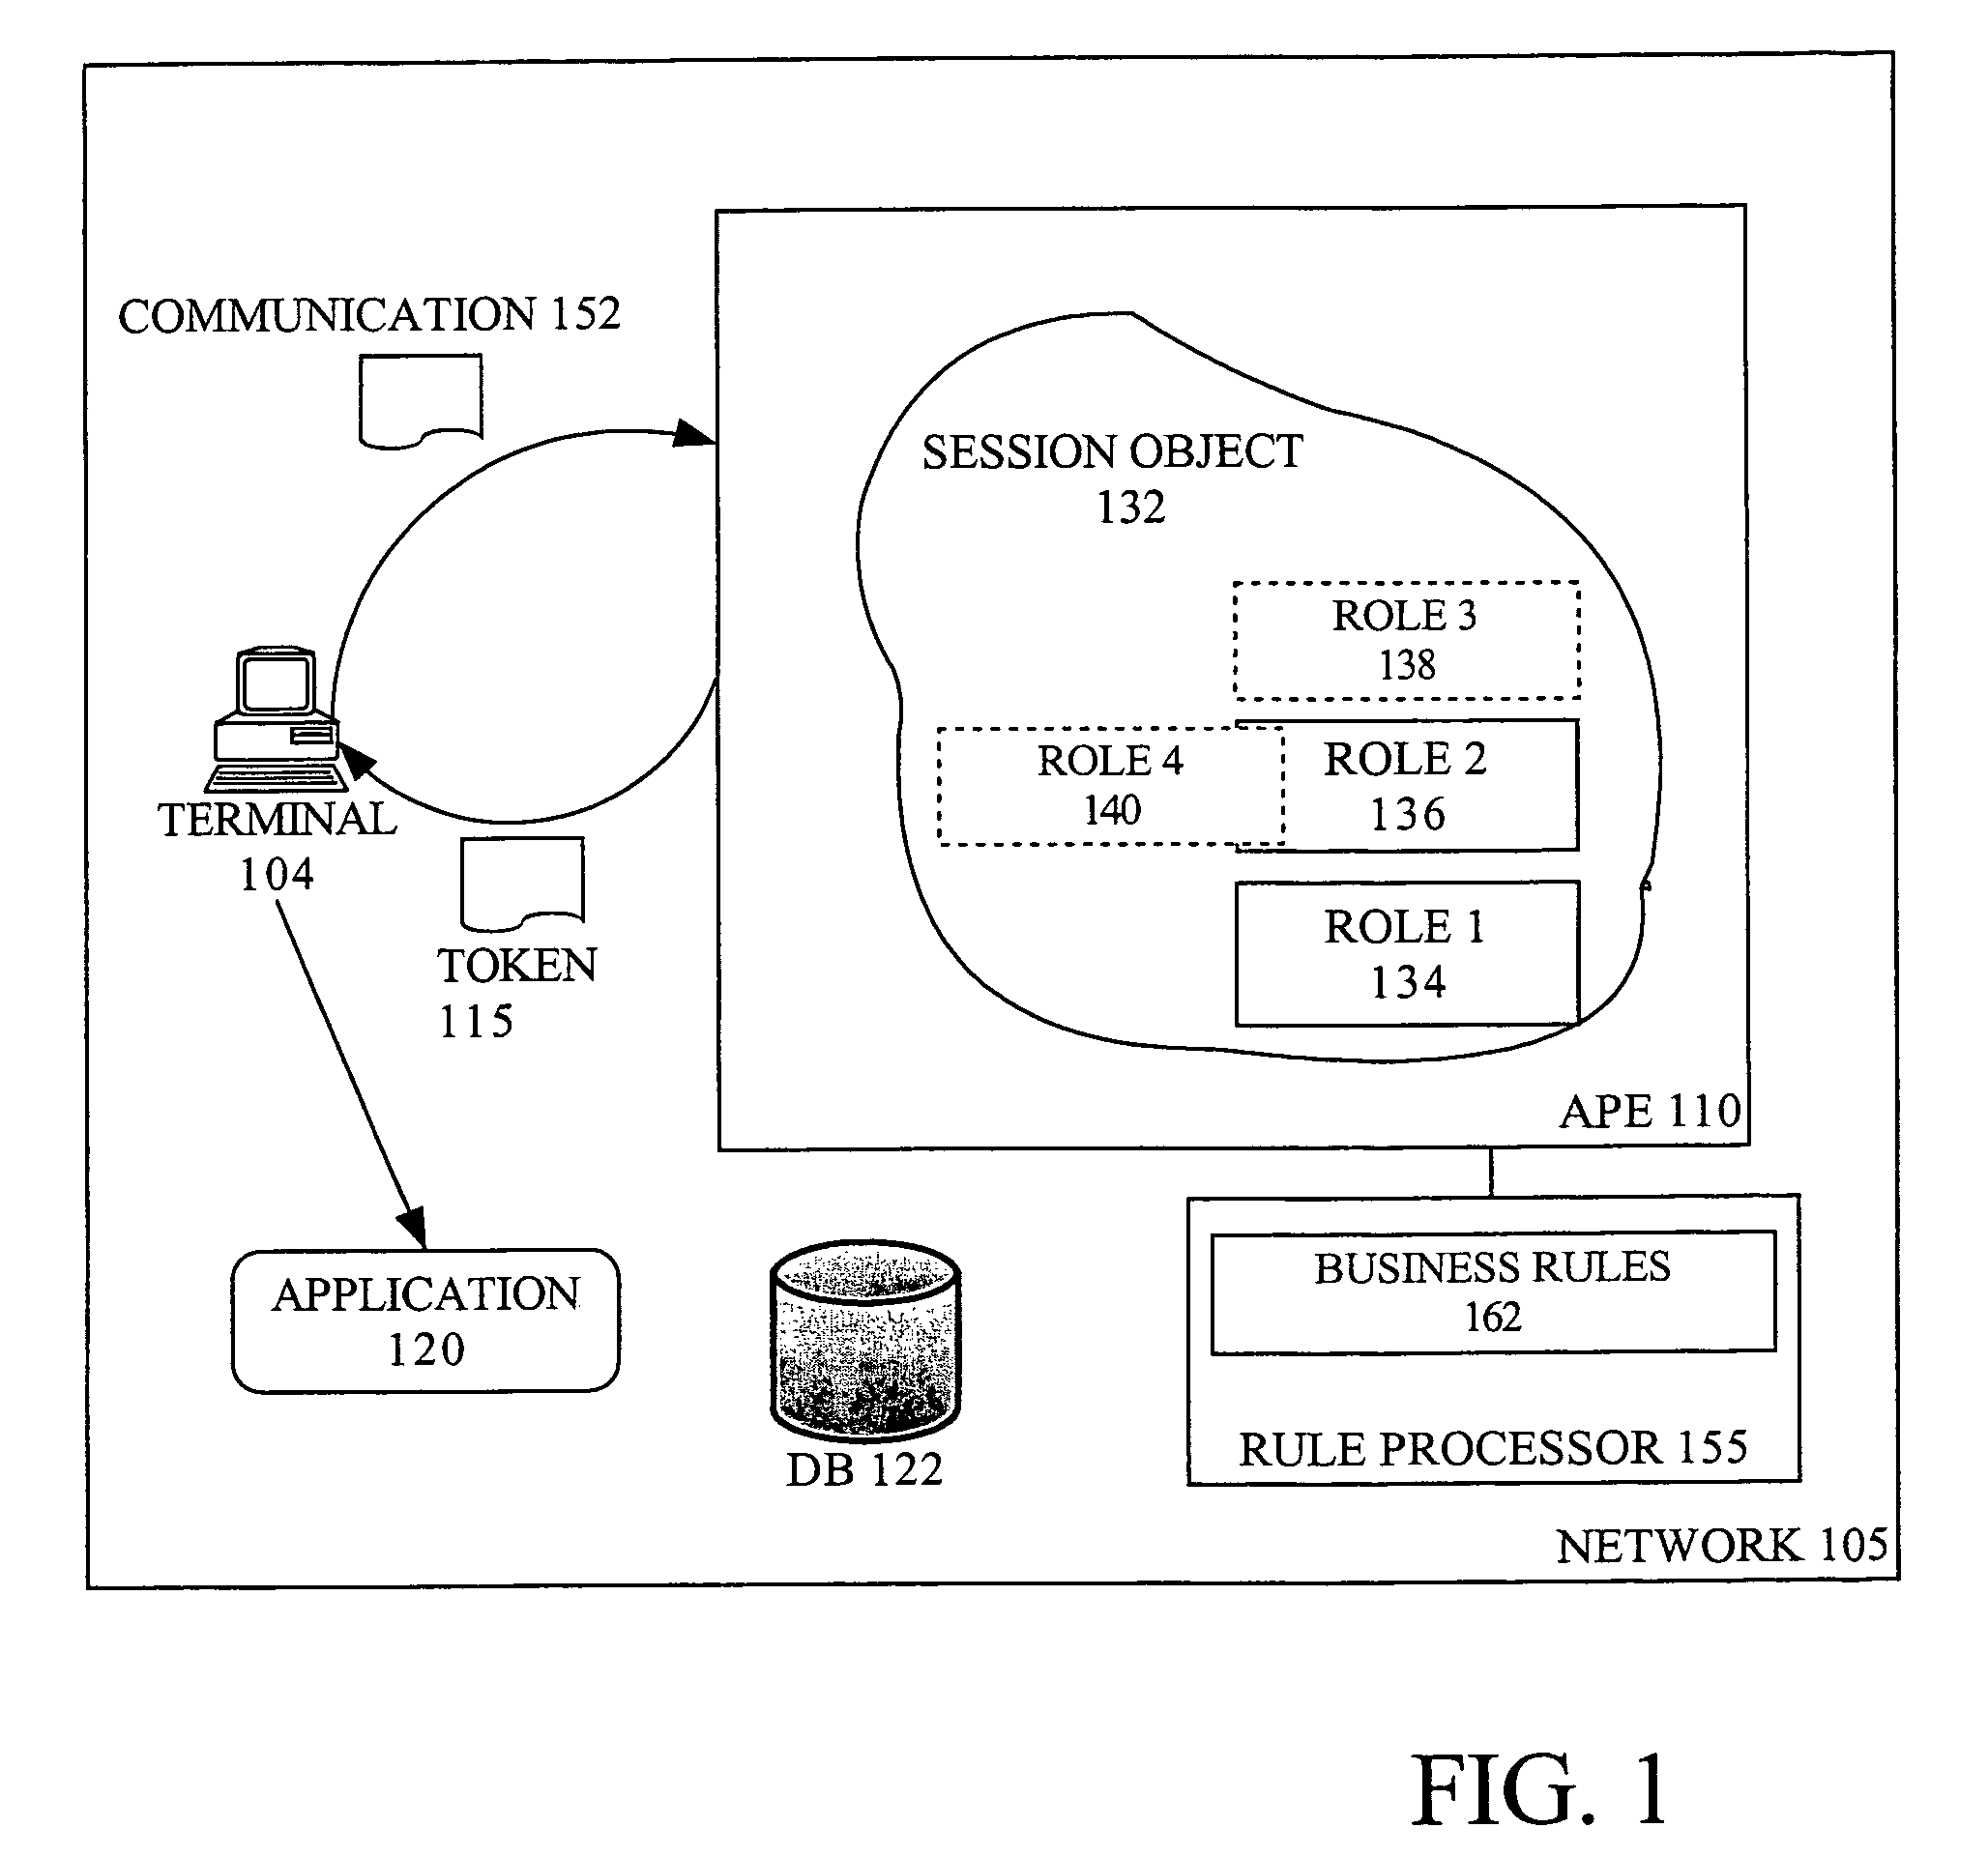 Method and apparatus for using a role based access control system on a network